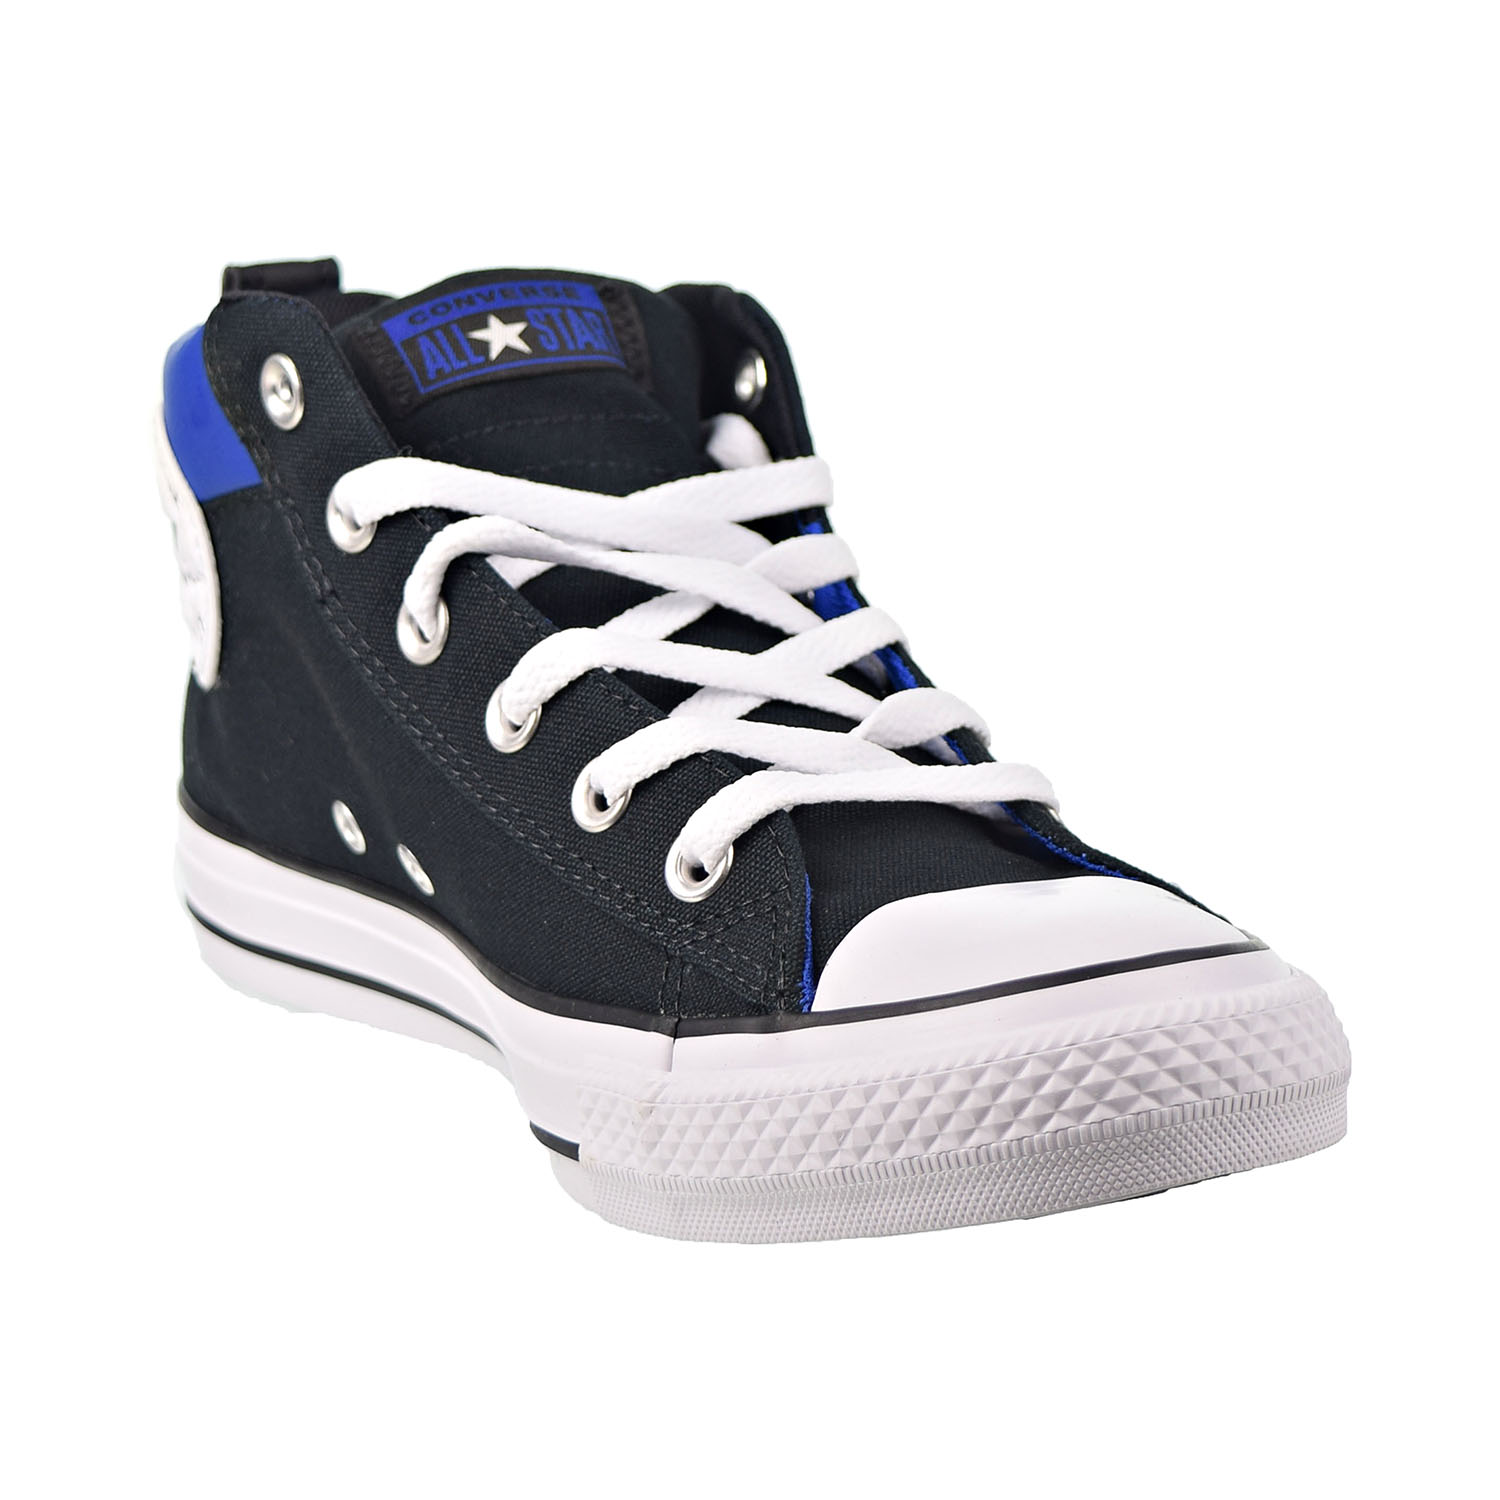 Converse Chuck Taylor All Star Street Mid Men's Shoes Black-White-Blue  164887f